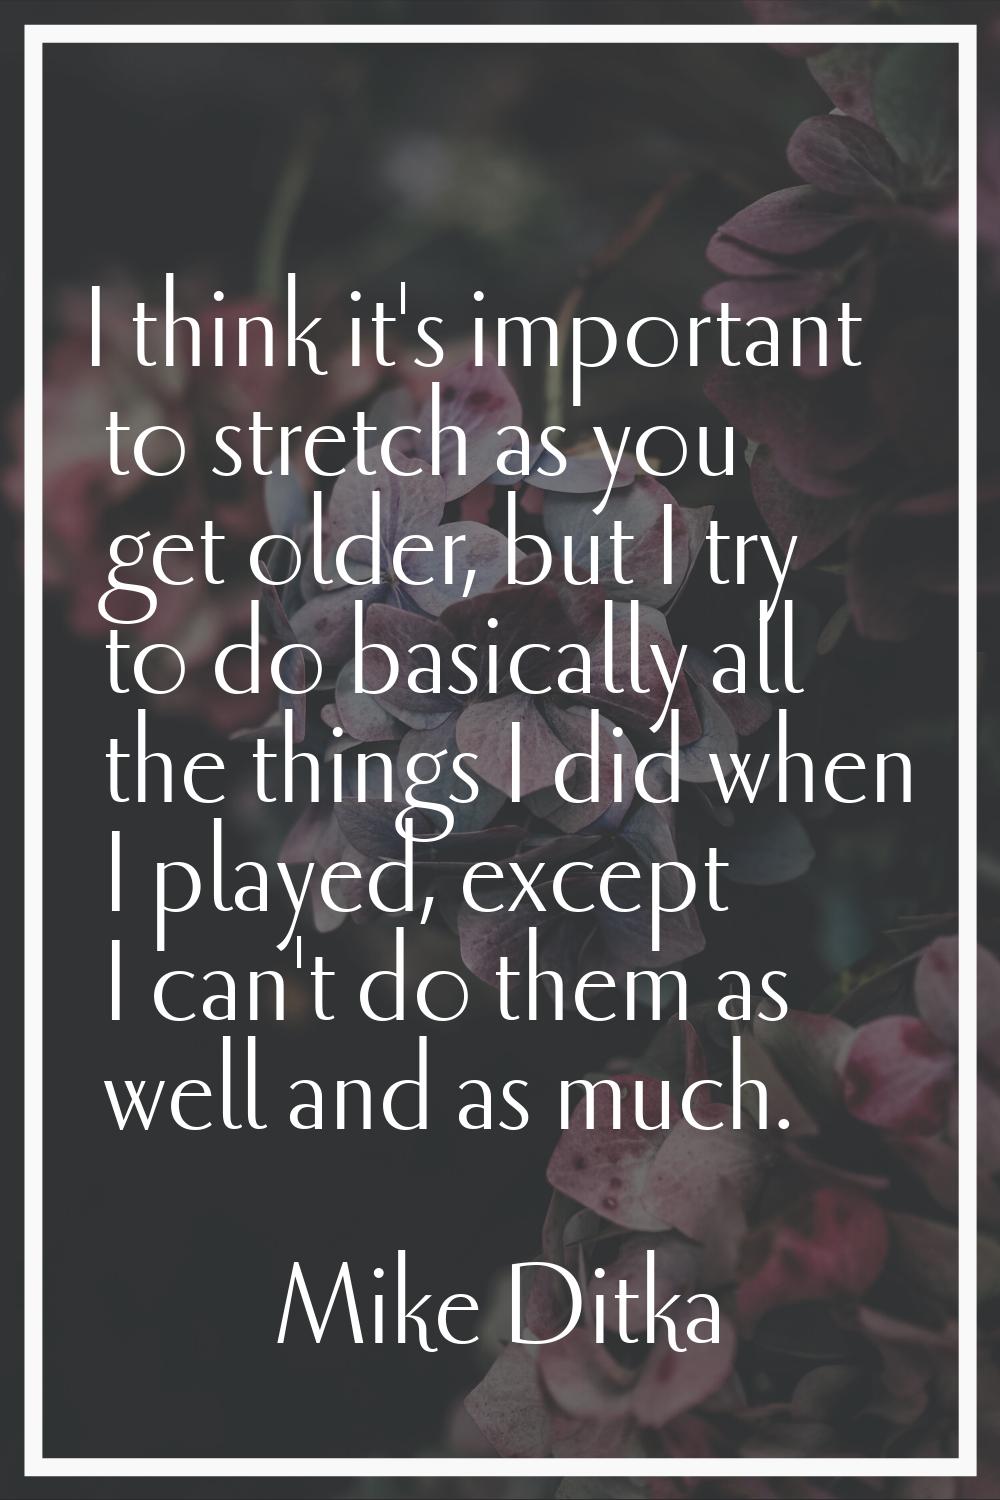 I think it's important to stretch as you get older, but I try to do basically all the things I did 